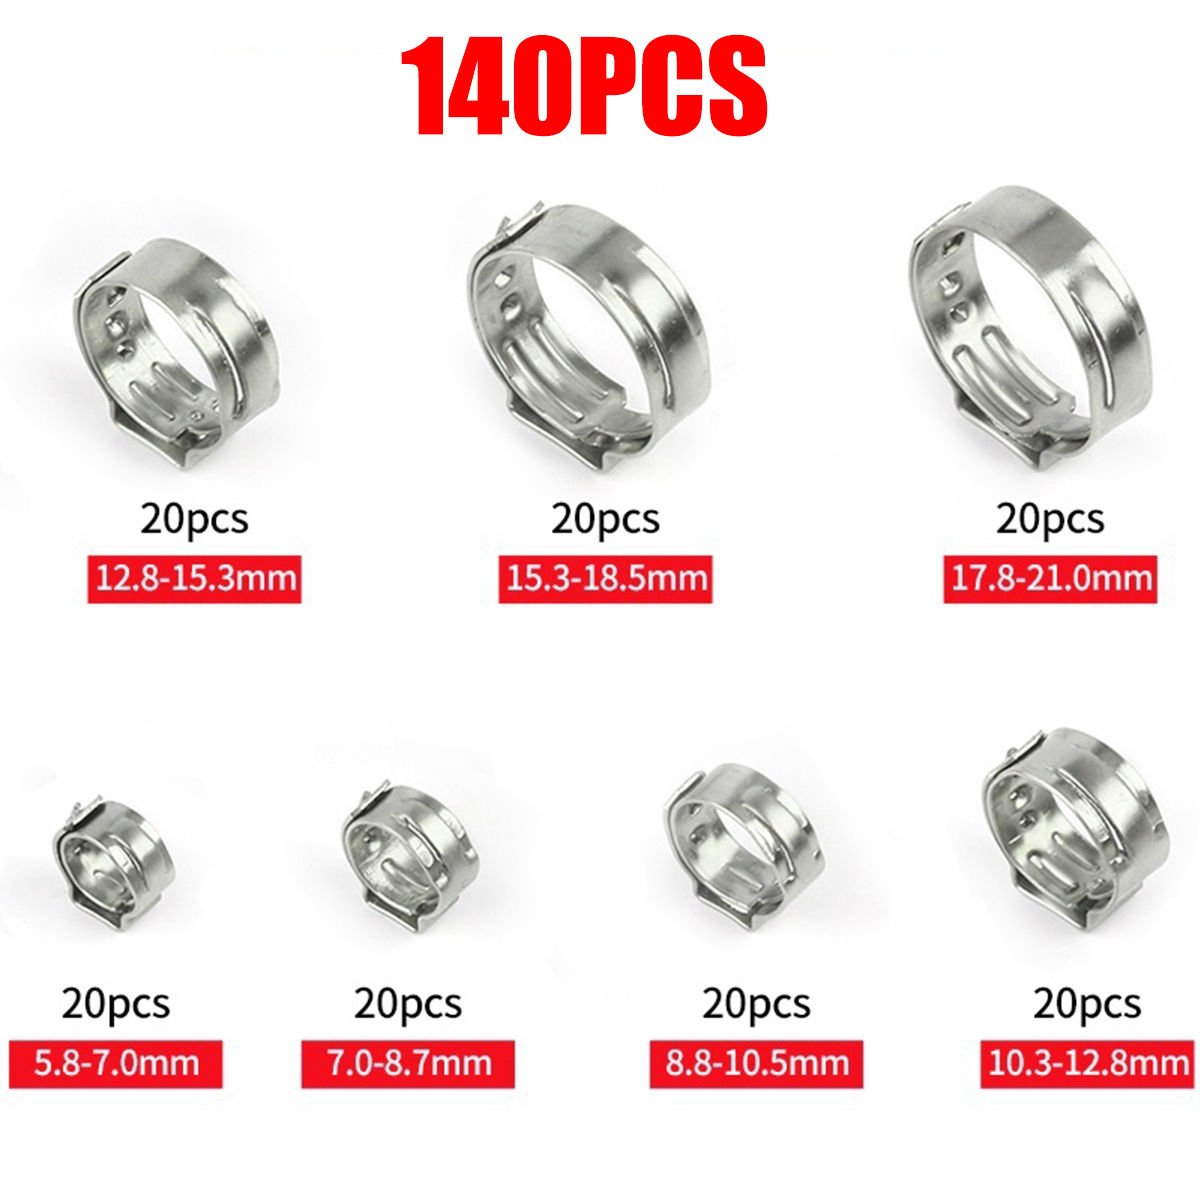 140PcsSet-Hose-Clamp-Stainless-Steel-Fuel-Pipe-Tube-Clips-Crimping-Tool-58-21mm-1730009-5